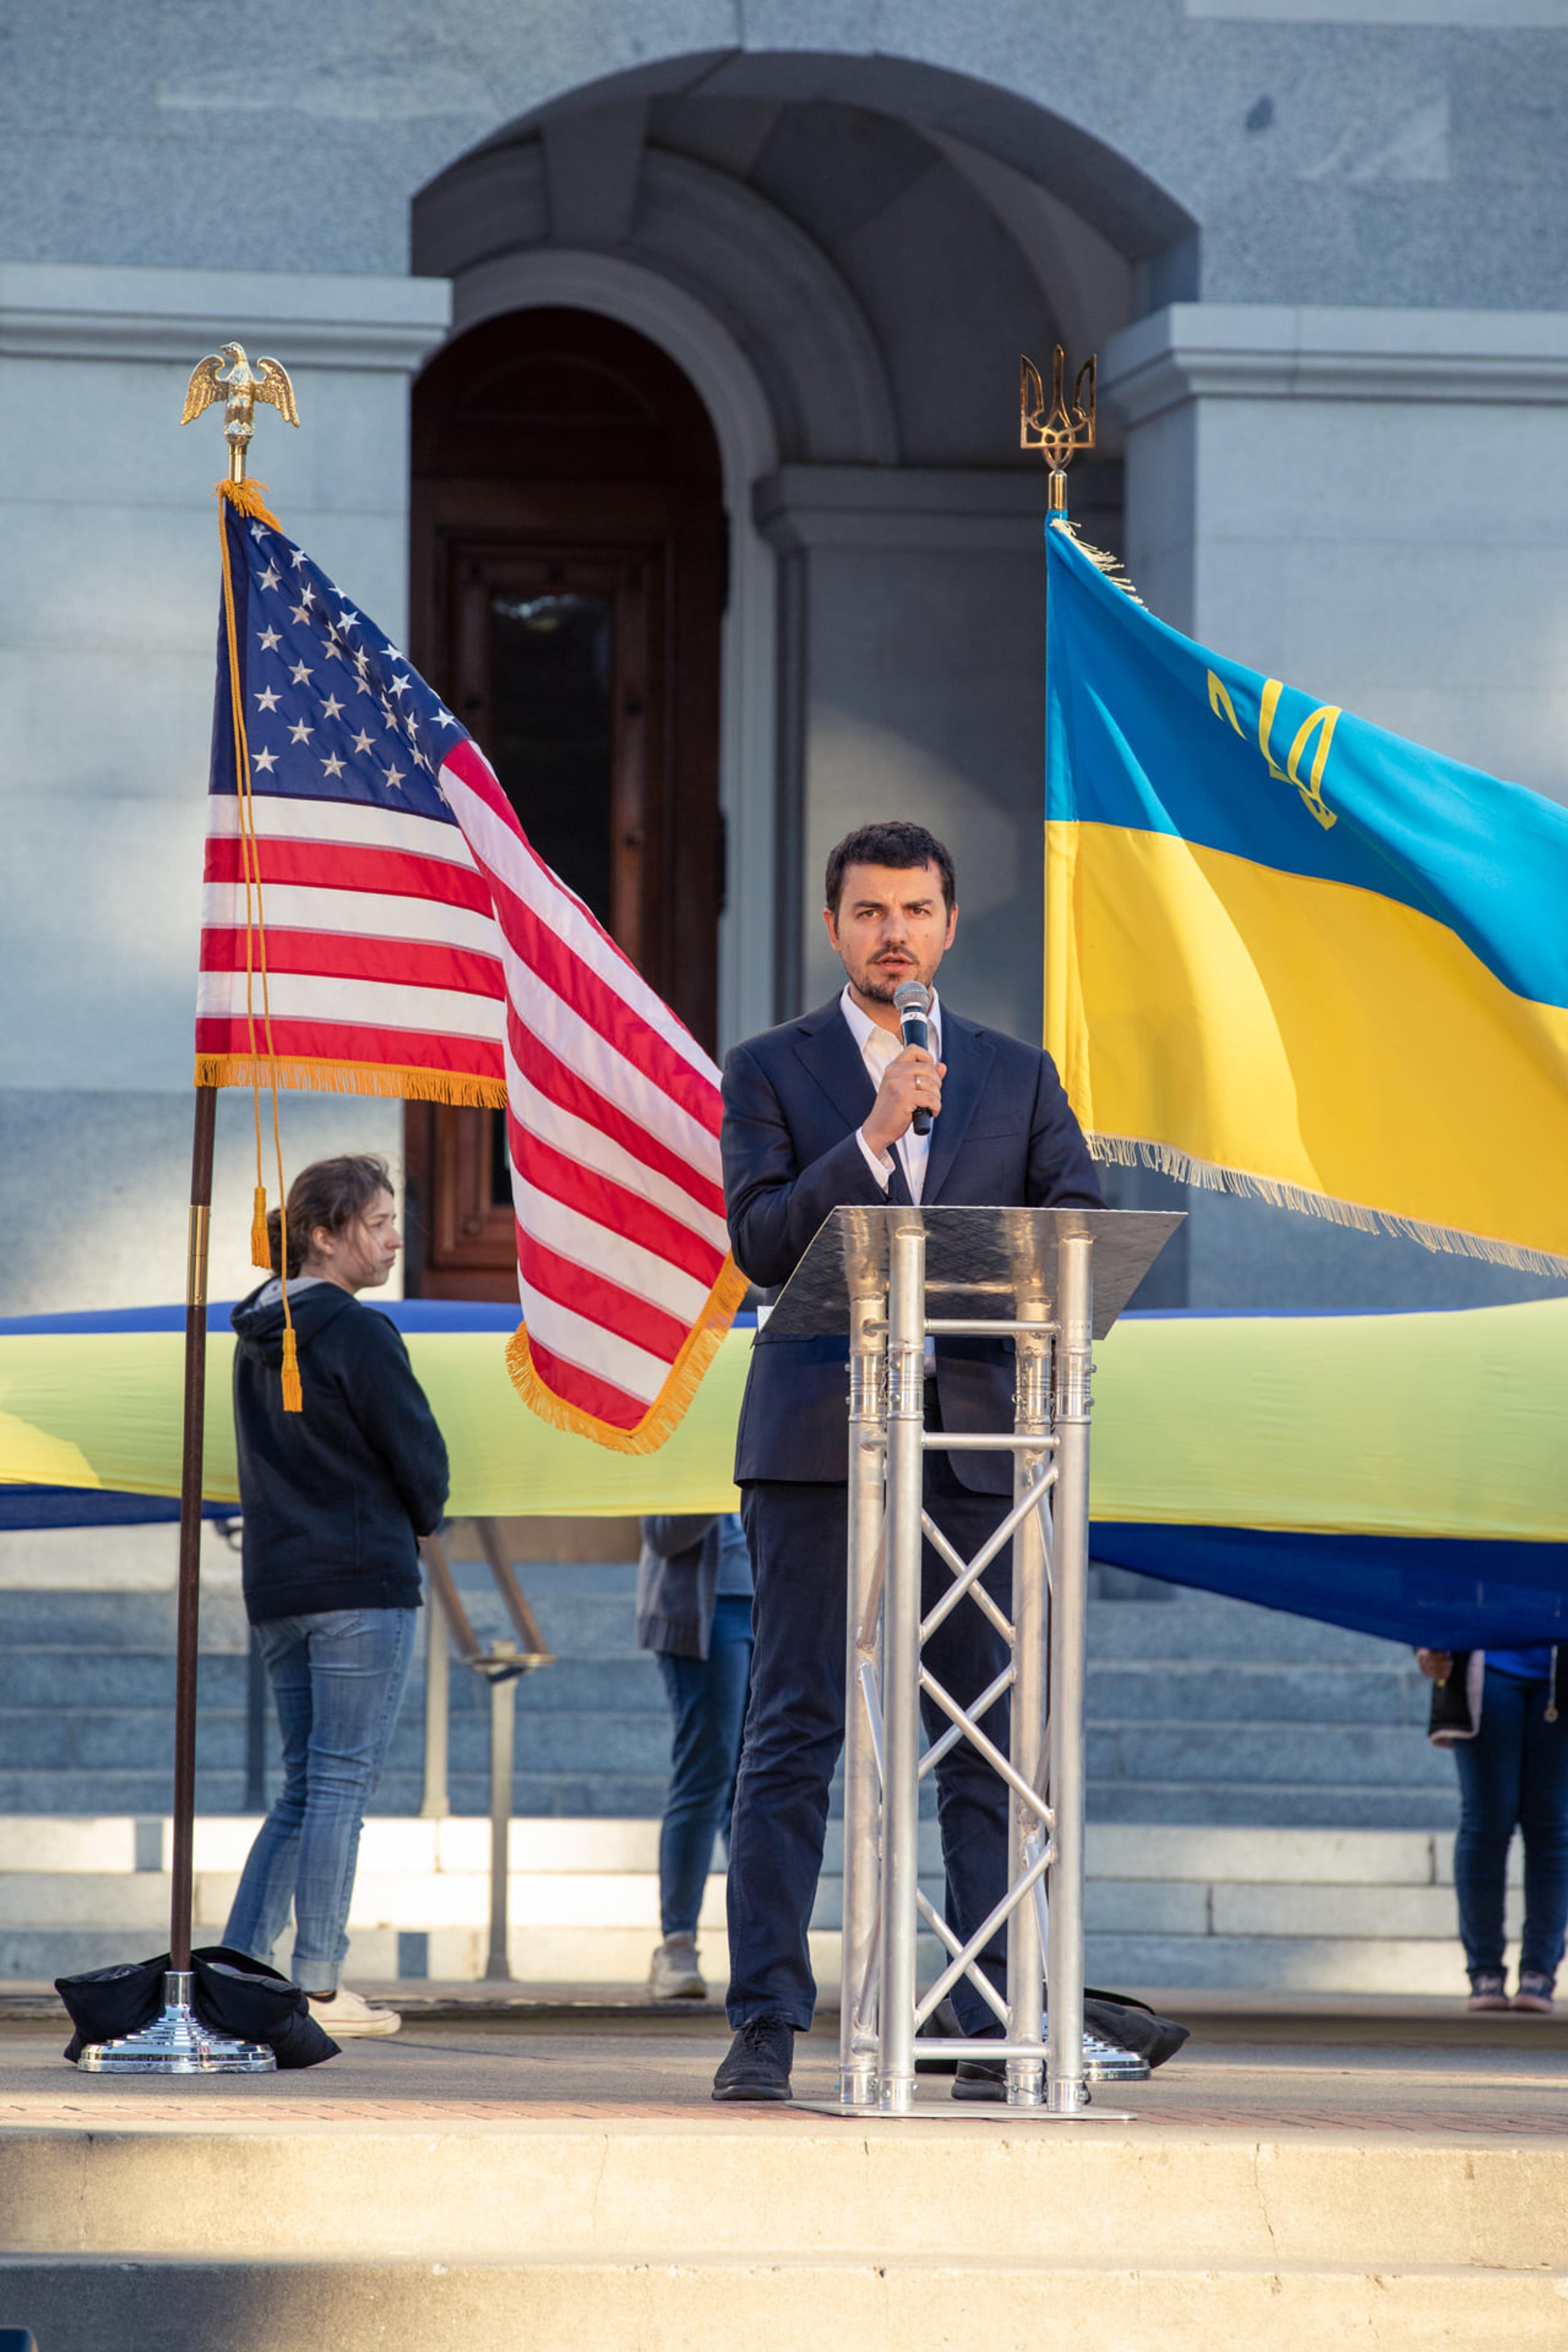 Hundreds of Ukraine Supporters gathered near the Capitol for the Peace Rally